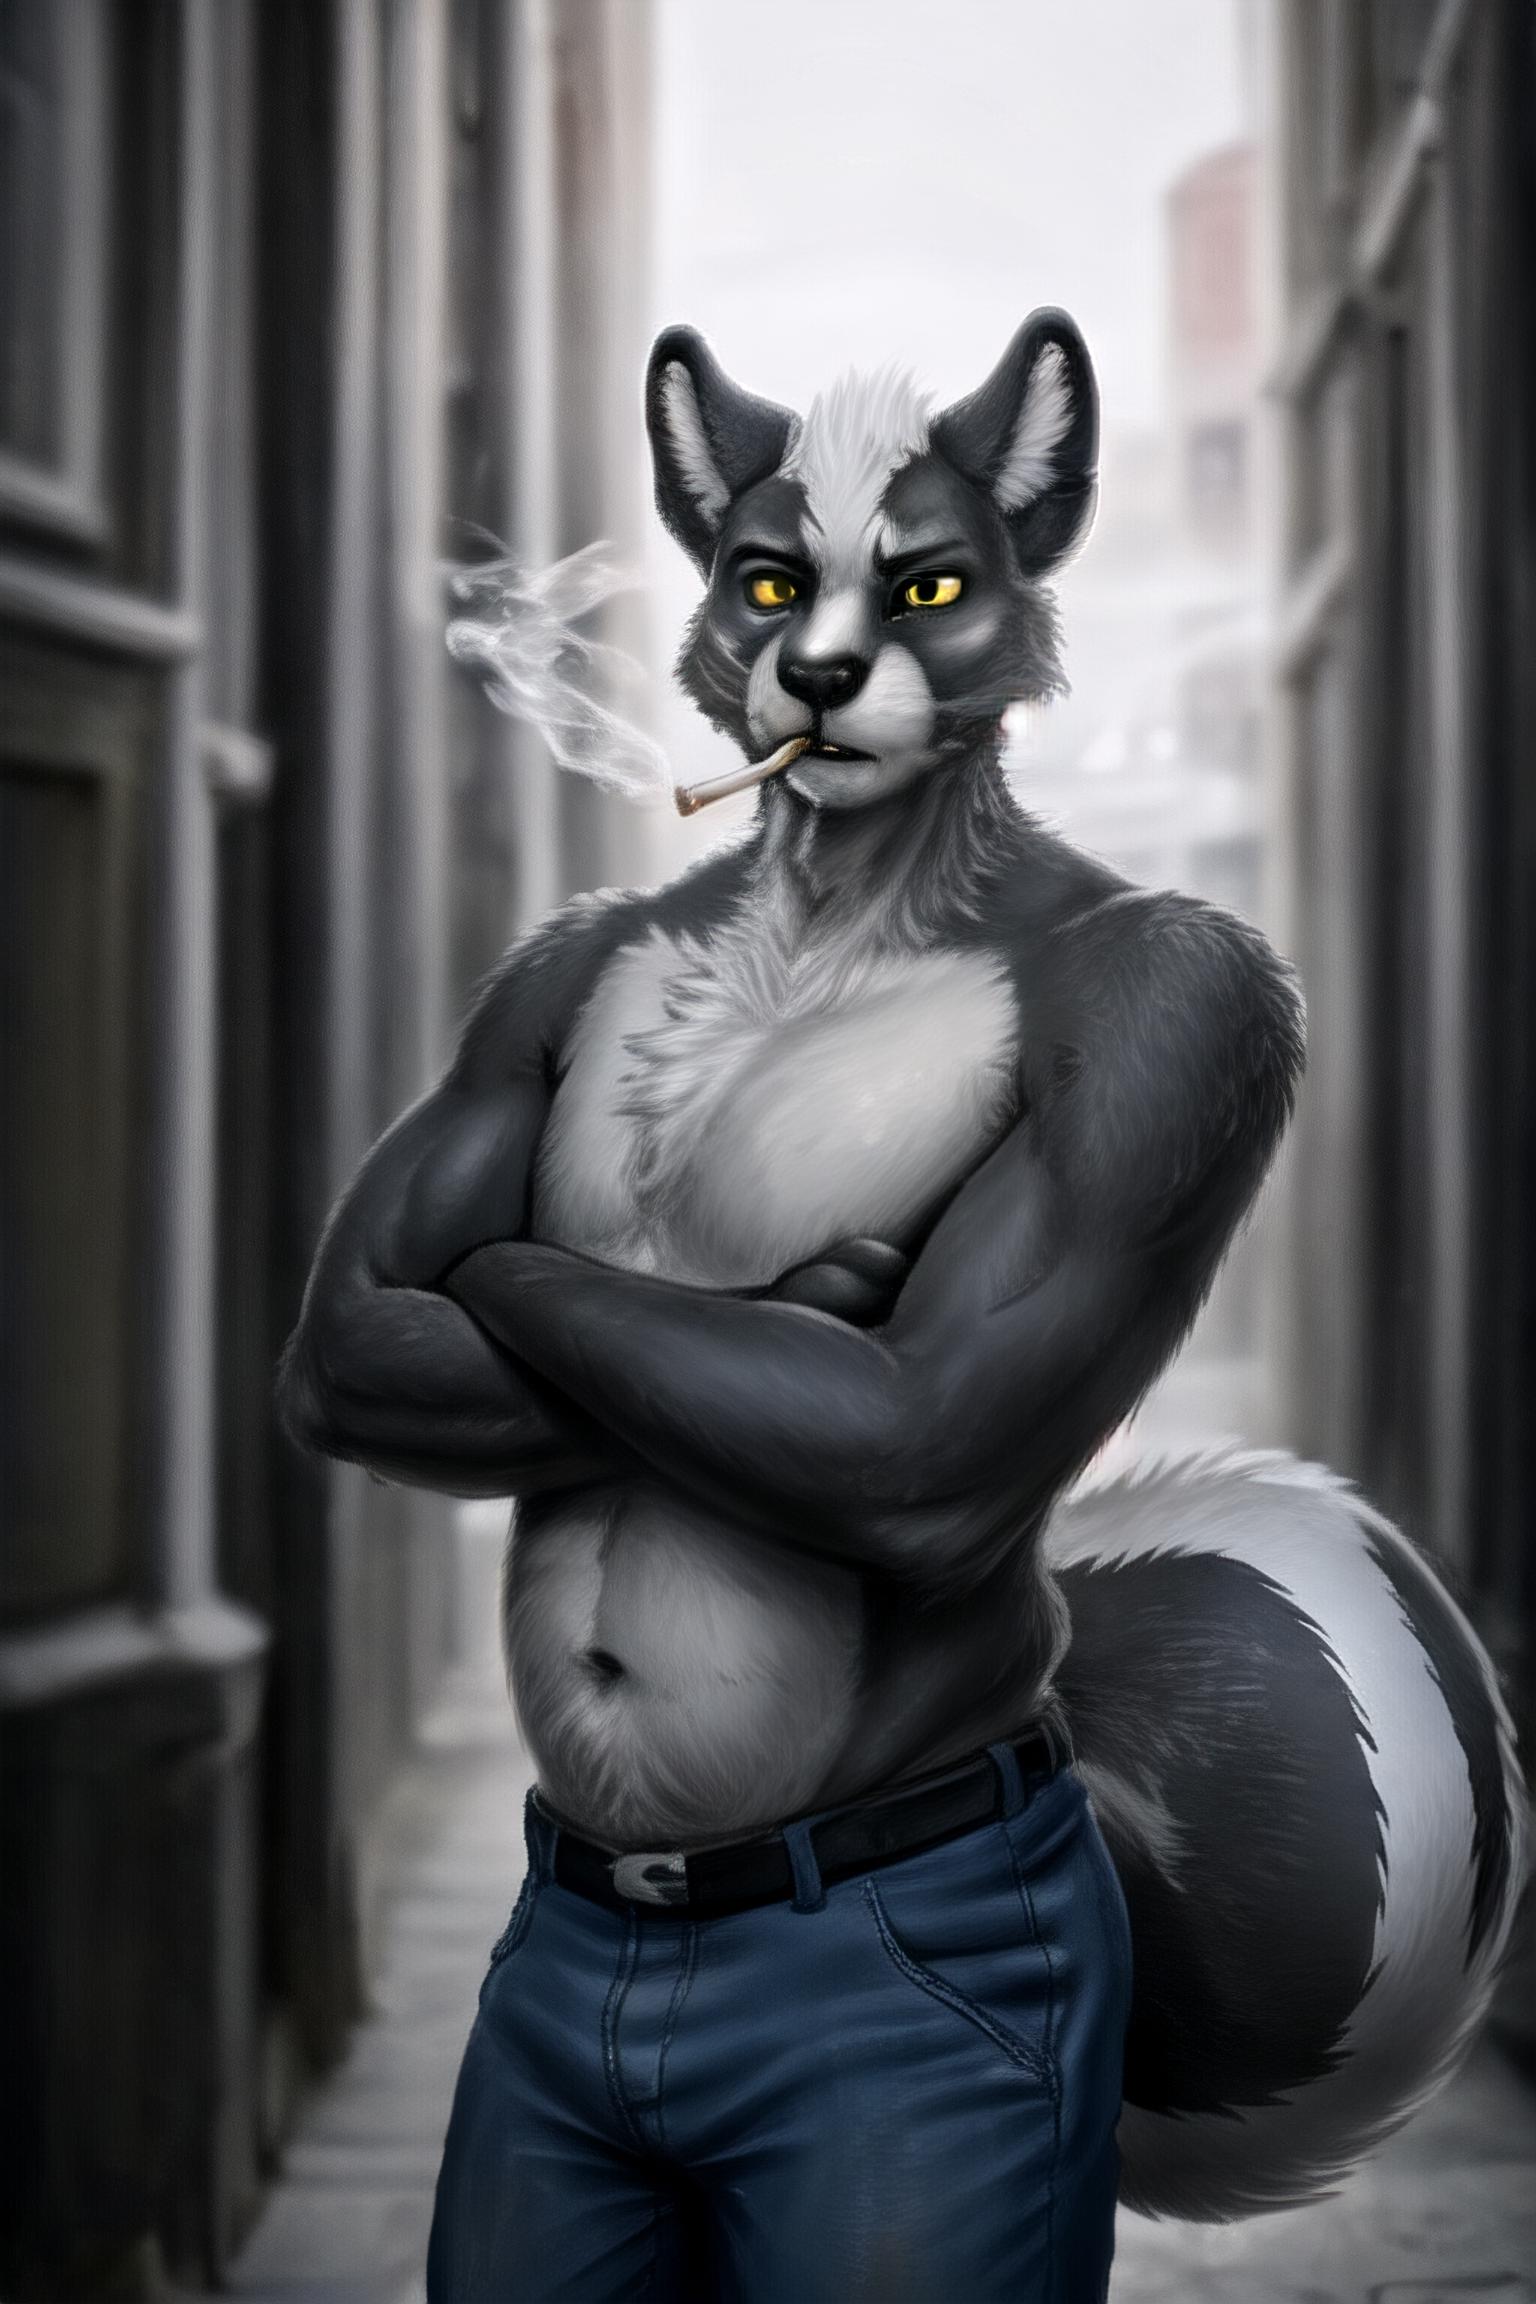 AI model image by quentinwolf